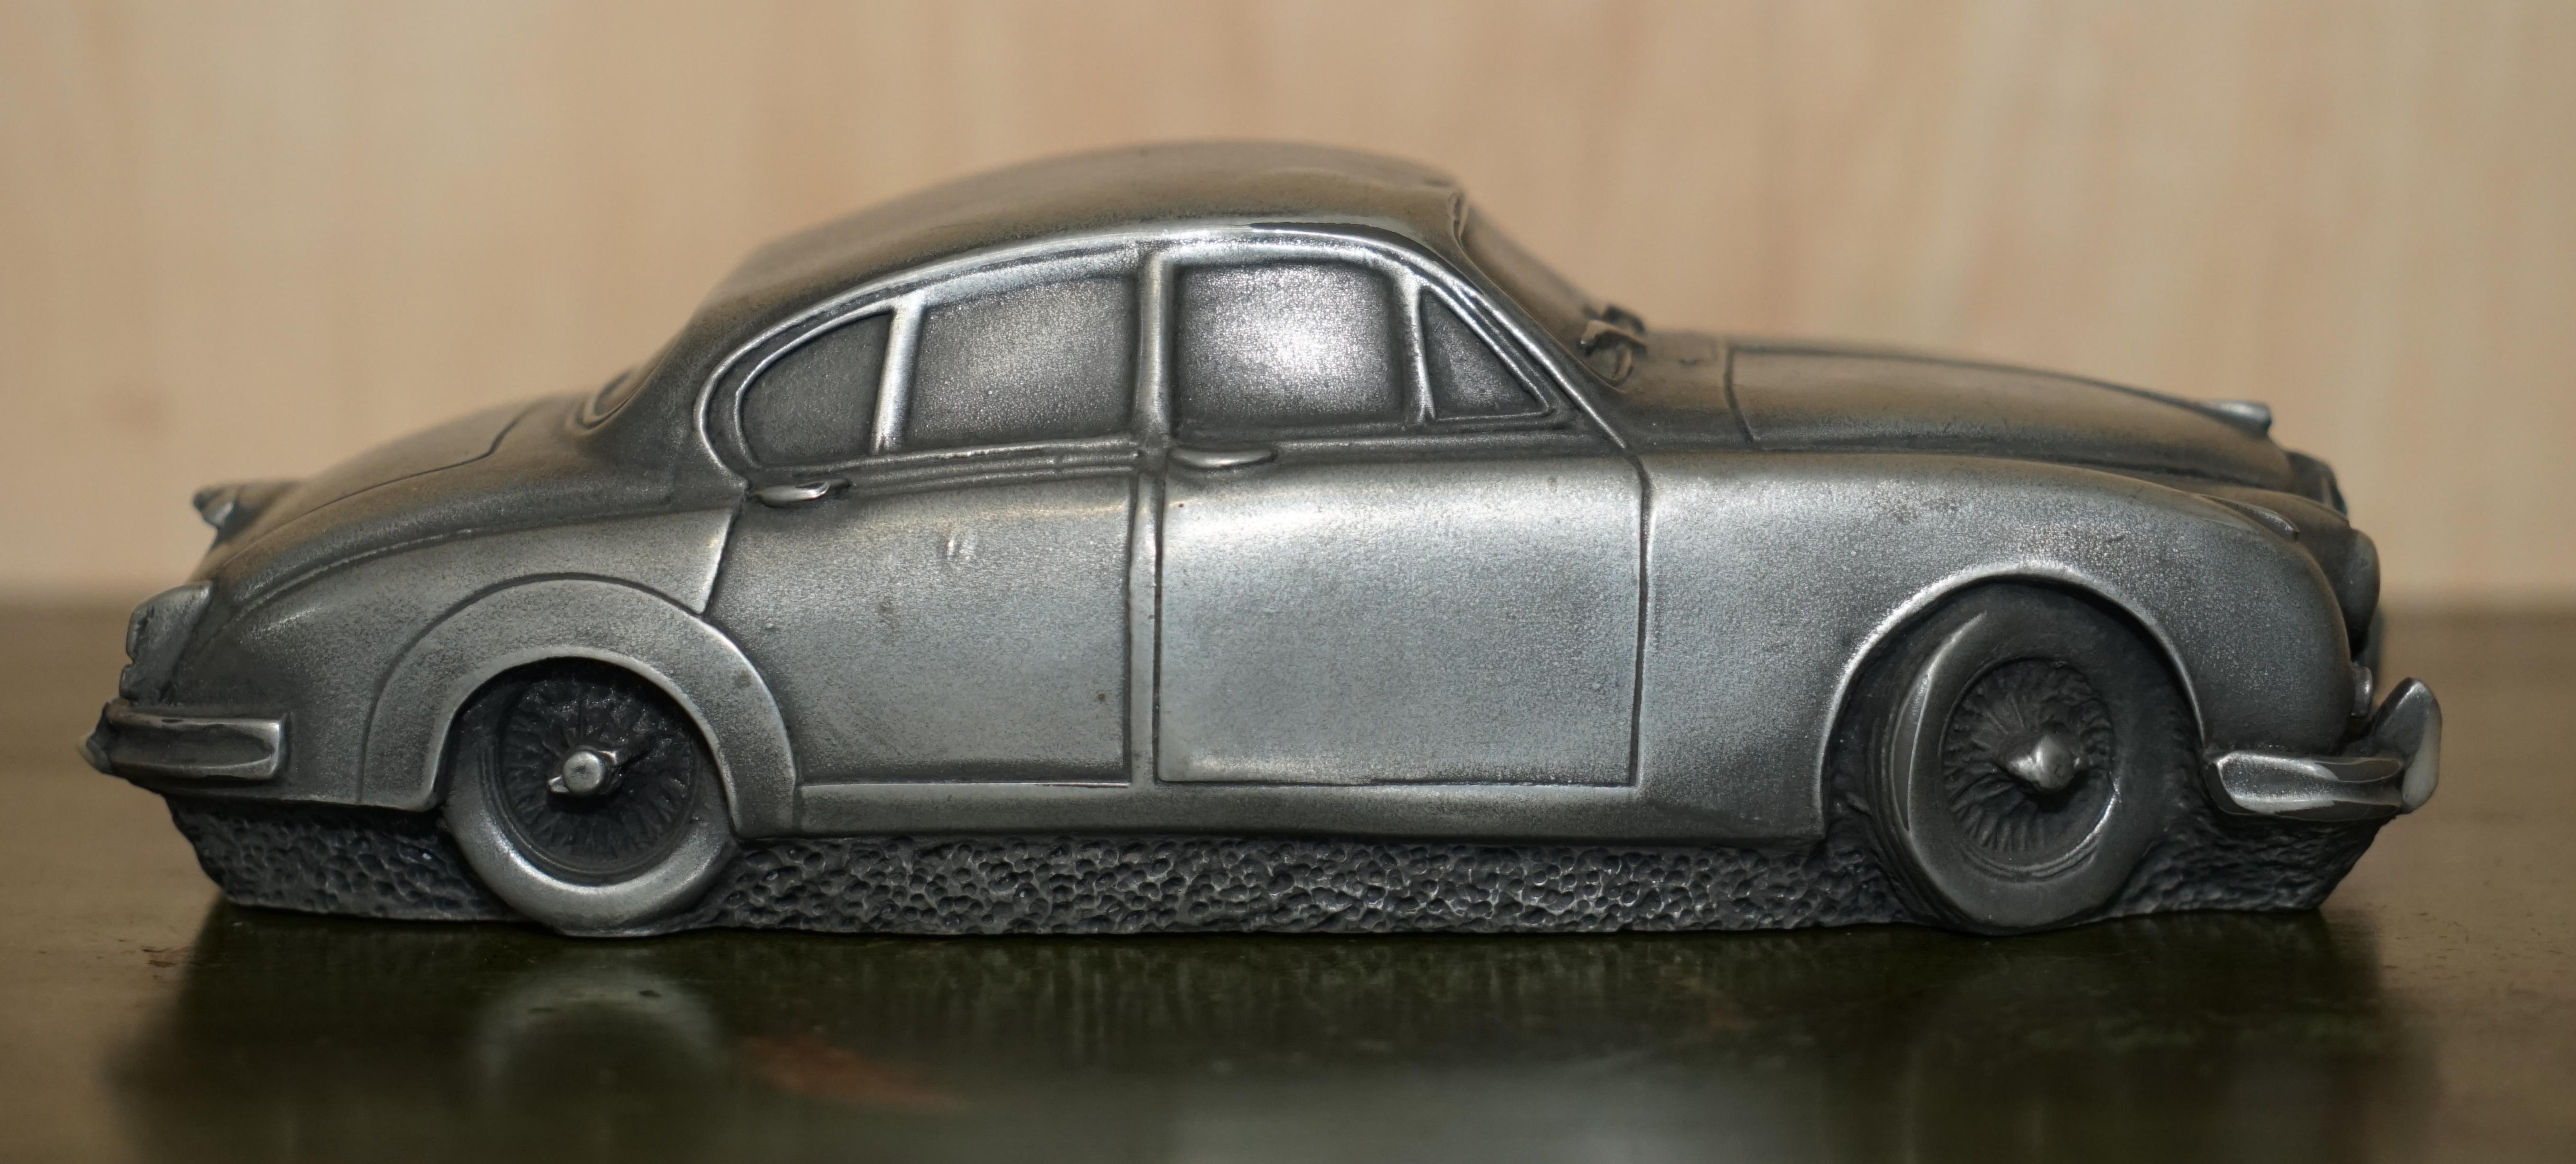 (a) Gallery Pewter Jaguar 1955-1959 Edition Mark i Car Must See Pictures en vente 7